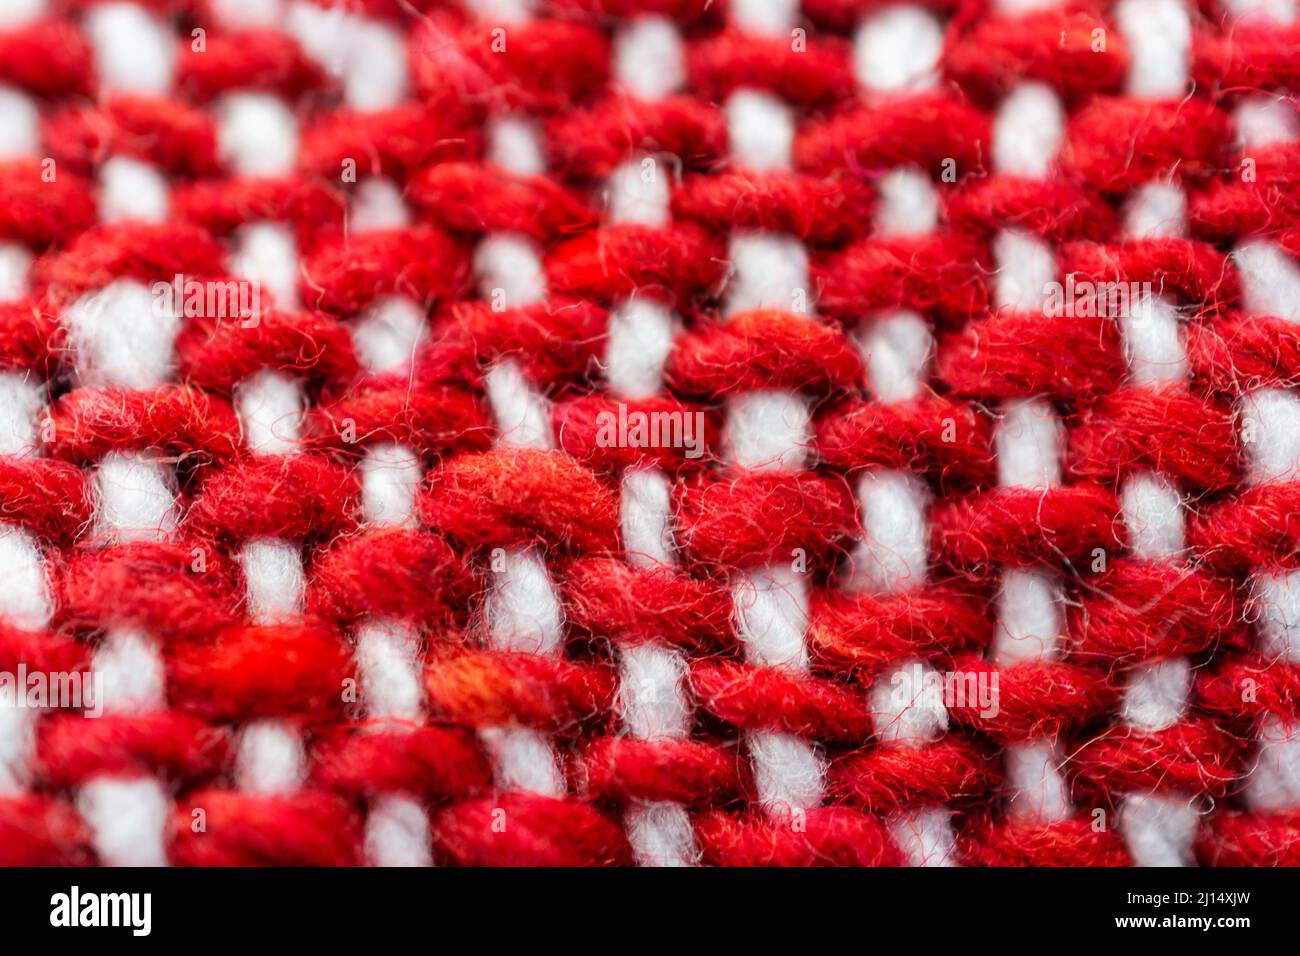 A close up view of a red and white woven blanket. Stock Photo